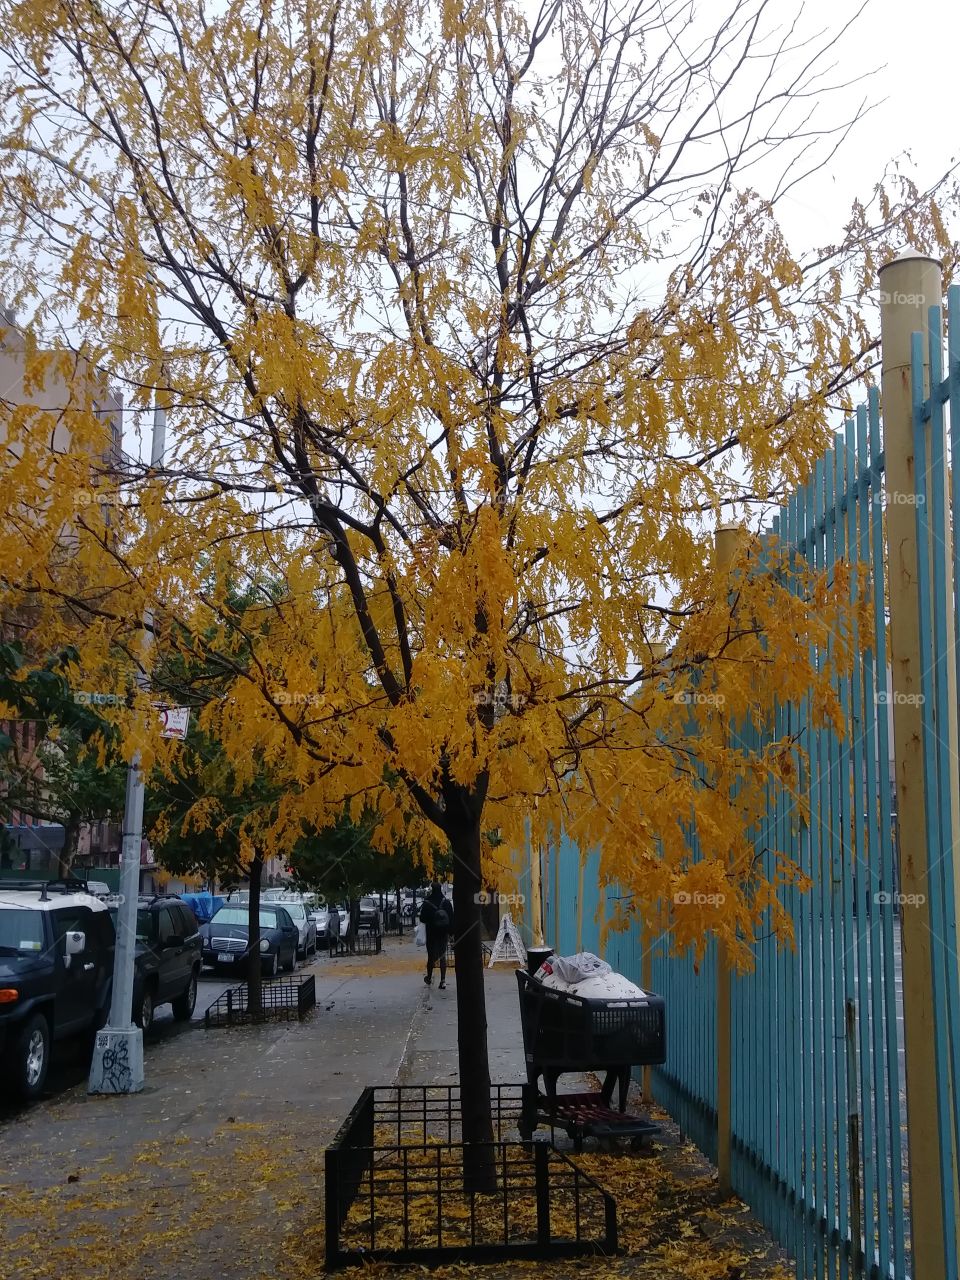 yellow leaved tree in fall shopping cart fence street